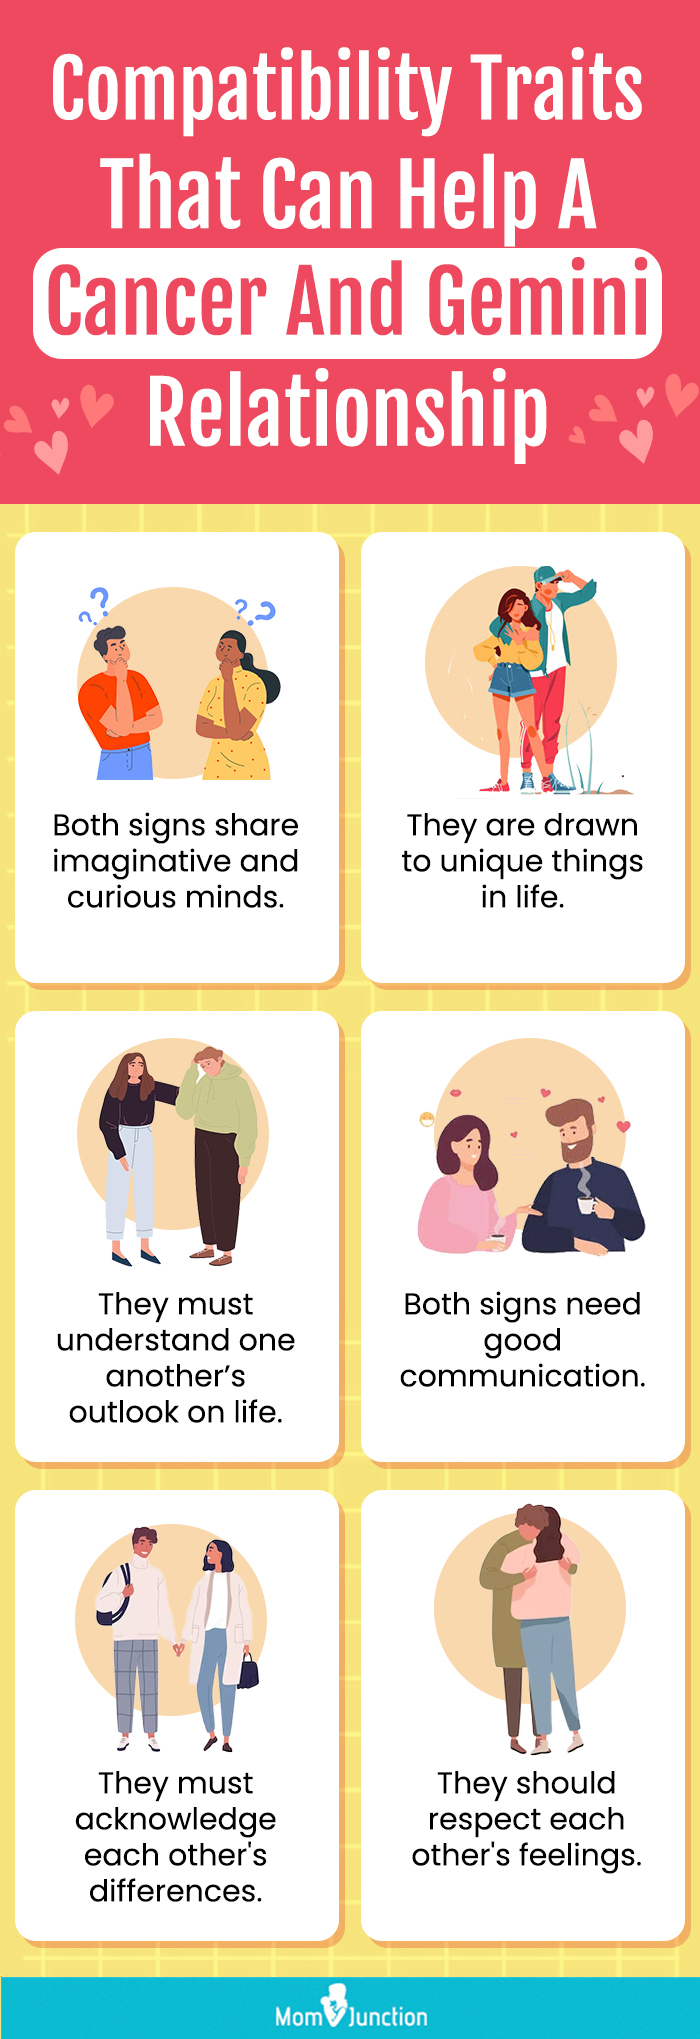 compatibility traits that can help a cancer and gemini relationship (infographic)